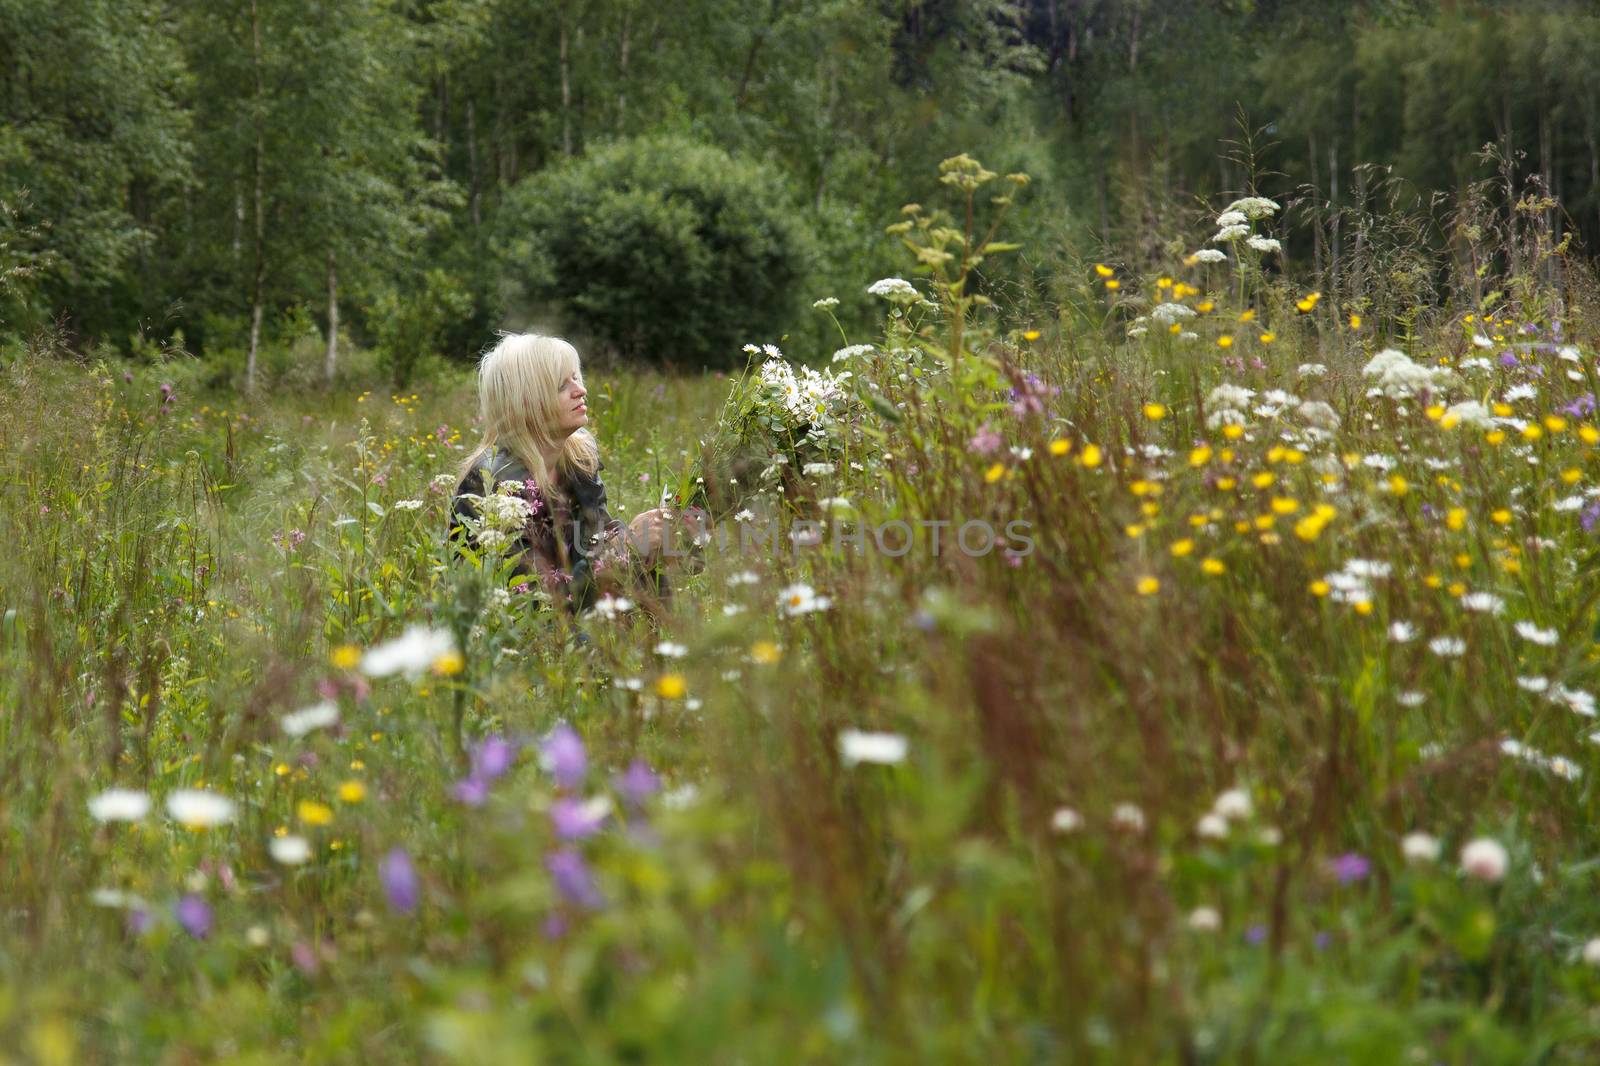 A blond woman collecting flowers in a flower field